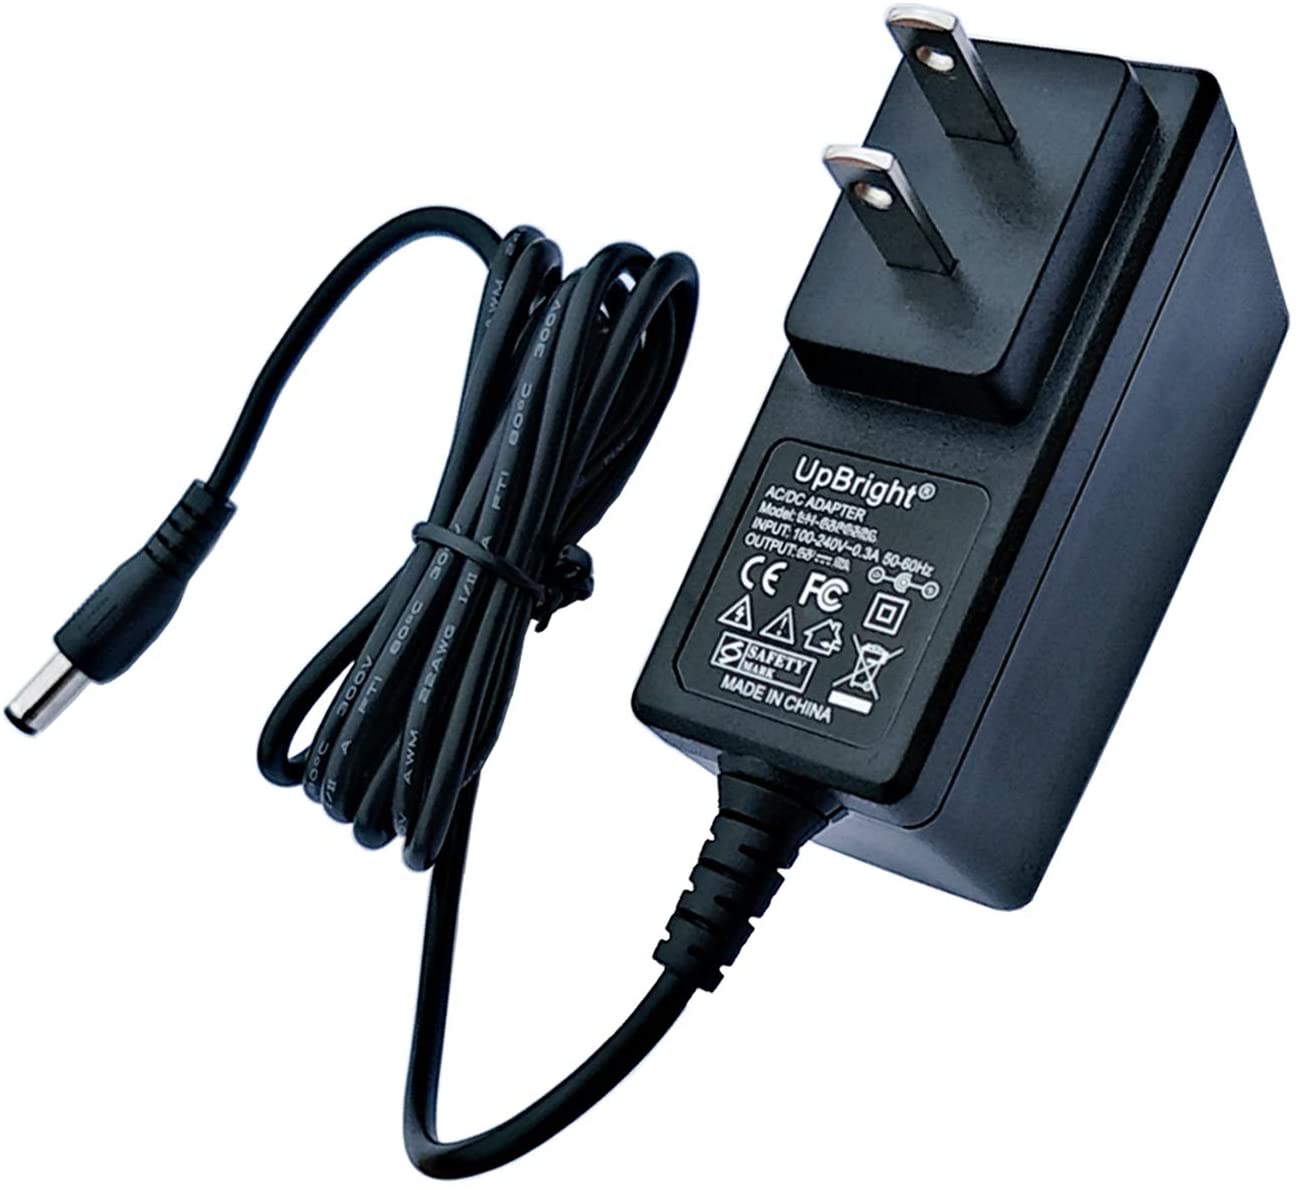 UPBRIGHT AC Adapter For LIQUIDVIDEO ADPV26A DVD Player Charger Power Supply Cord PSU - image 1 of 5